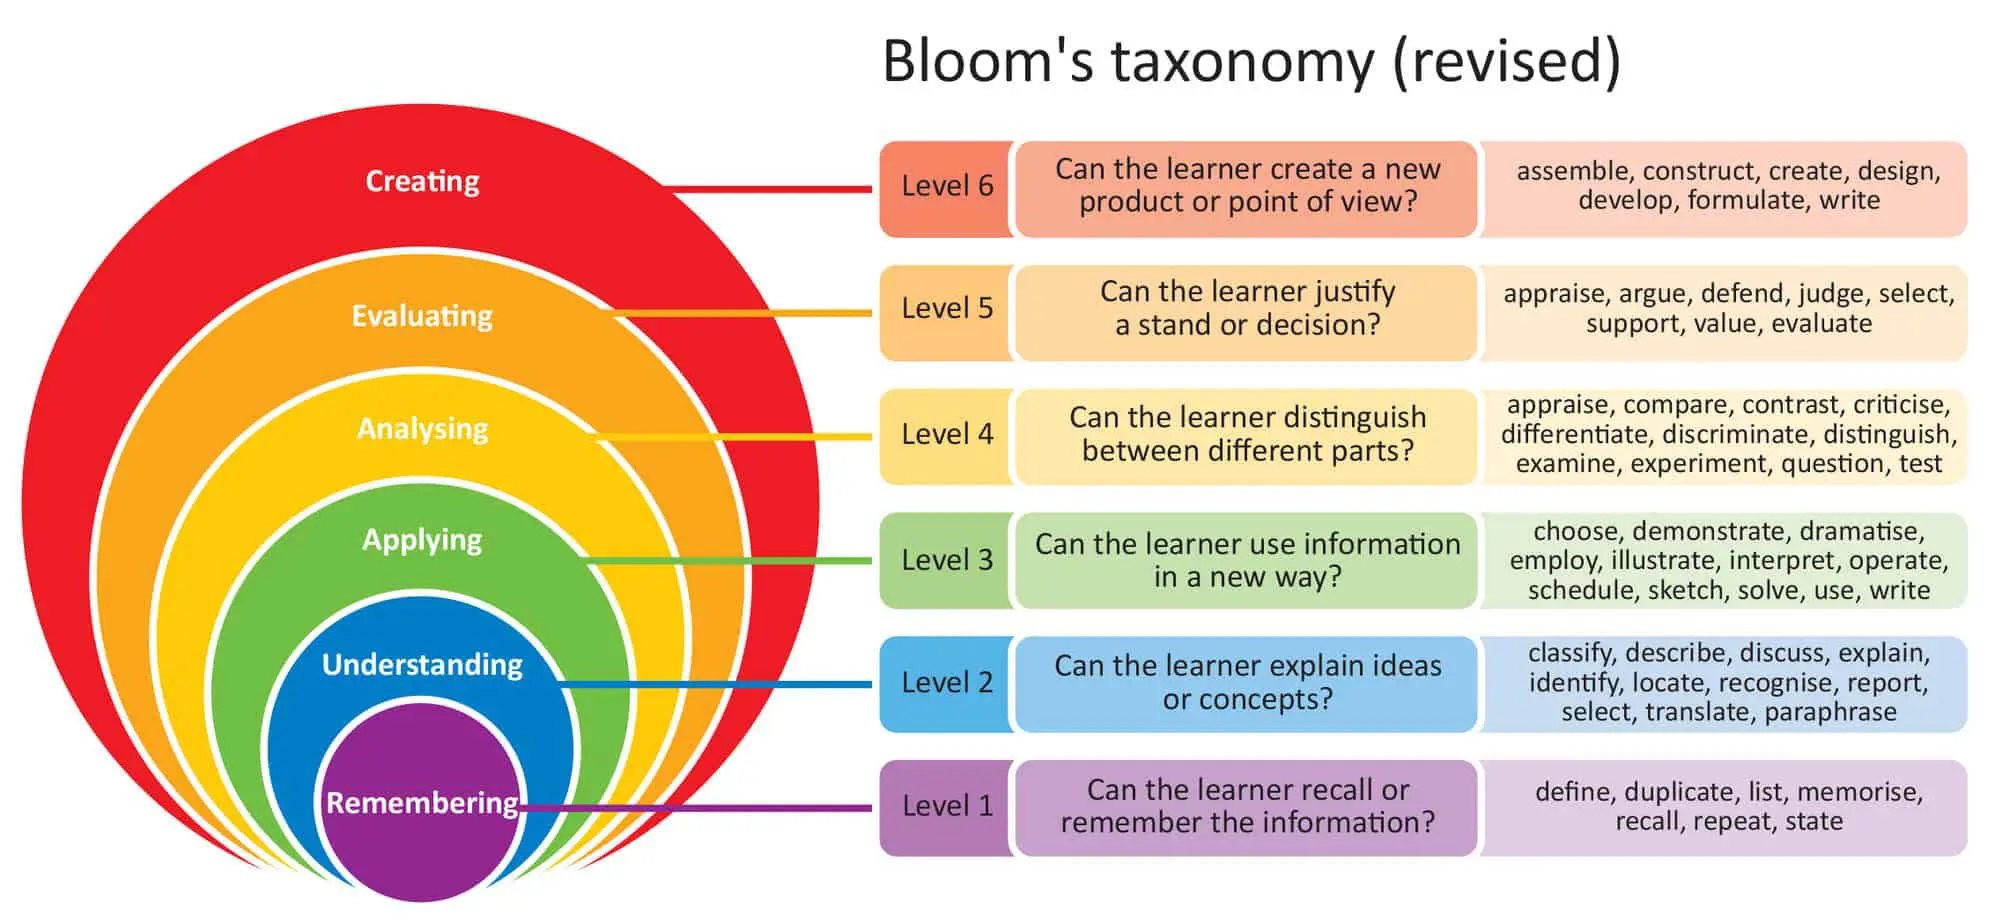 Bloom's Taxonomy (revised)  A multi-colored circular diagram represents six levels of cognitive processes, moving from the innermost circle to the outermost:  1. Remembering (Level 1) - Purple circle:     - Question: "Can the learner recall or remember the information?"     - Actions: define, duplicate, list, memorise, recall, repeat, state  2. Understanding (Level 2) - Blue circle:     - Question: "Can the learner explain ideas or concepts?"     - Actions: classify, describe, discuss, explain, identify, locate, recognise, report, select, translate, paraphrase  3. Applying (Level 3) - Green circle:     - Question: "Can the learner use information in a new way?"     - Actions: choose, demonstrate, dramatise, employ, illustrate, interpret, operate, schedule, sketch, solve, use, write  4. Analysing (Level 4) - Yellow circle:     - Question: "Can the learner distinguish between different parts?"     - Actions: appraise, compare, contrast, criticise, differentiate, discriminate, distinguish, examine, experiment, question, test  5. Evaluating (Level 5) - Orange circle:     - Question: "Can the learner justify a stand or decision?"     - Actions: appraise, argue, defend, judge, select, support, value, evaluate  6. Creating (Level 6) - Red circle:     - Question: "Can the learner create a new product or point of view?"     - Actions: assemble, construct, create, design, develop, formulate, write.